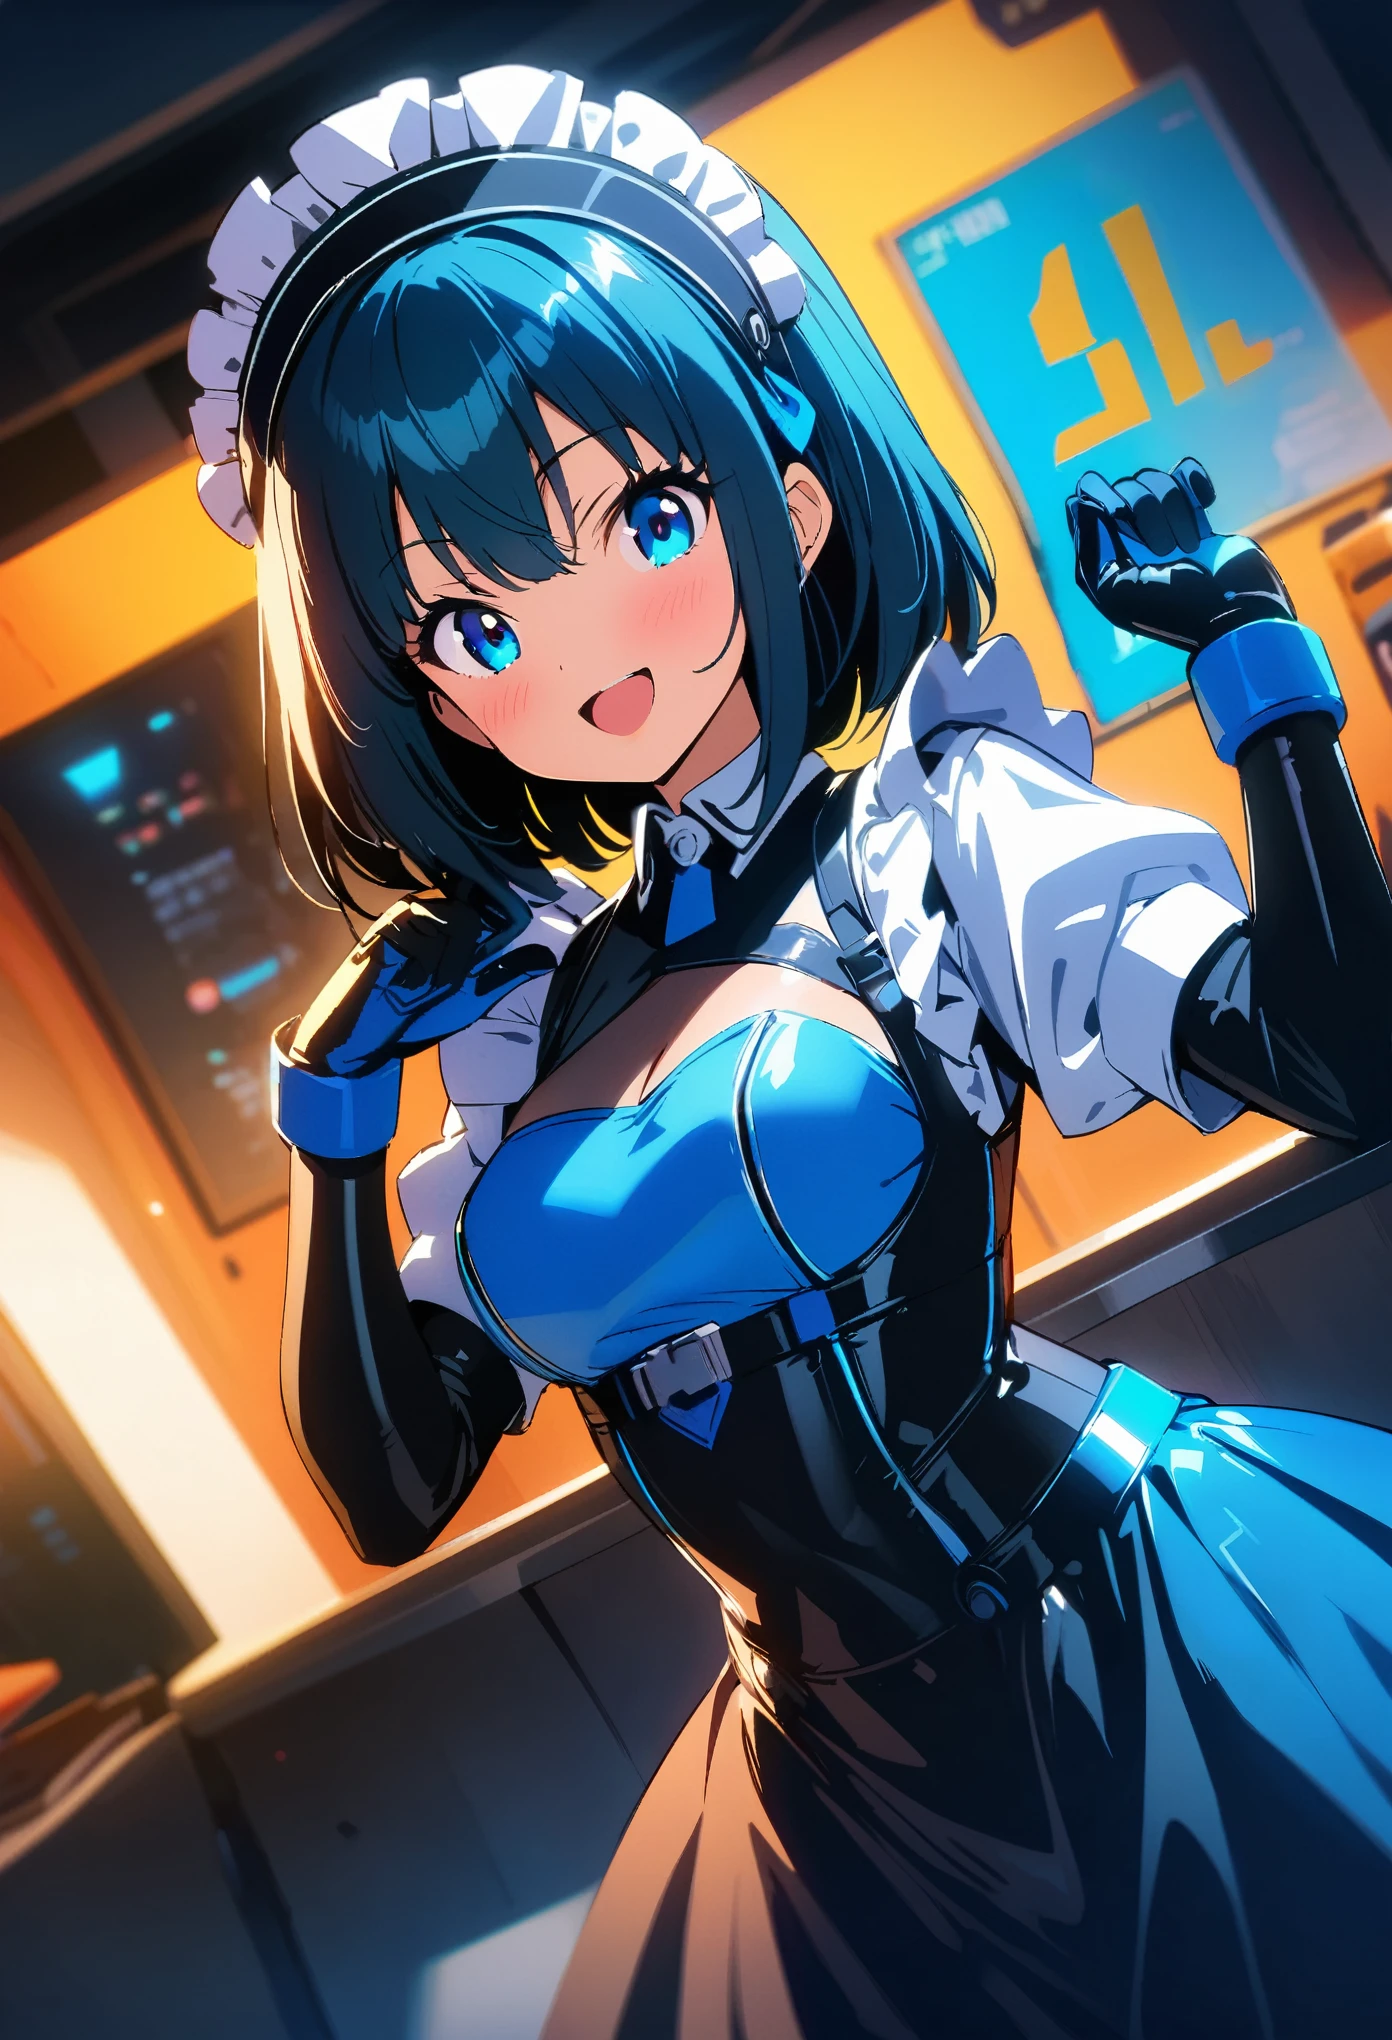 (highest quality:1.2, 4K, 8k, Studio Anime, Very detailed, up to date, Vibrant, High detail, High Contrast, masterpiece:1.2, highest quality, Best aesthetics), (((1 girl))), Stand and pose, Maid, Maid服, Cyber Suit:1.2, サイバーパンクMaid服:1.4, Bodysuits, Headdress, Frills, Mecha Dress Suit, Blushing:1.2, smile, Dynamic Angle, Dutch Angle:1.3, Friendly atmosphere, Put your hands up, Fun and young々Shii々Cool vibe, Precision and focus, Striking contrast,